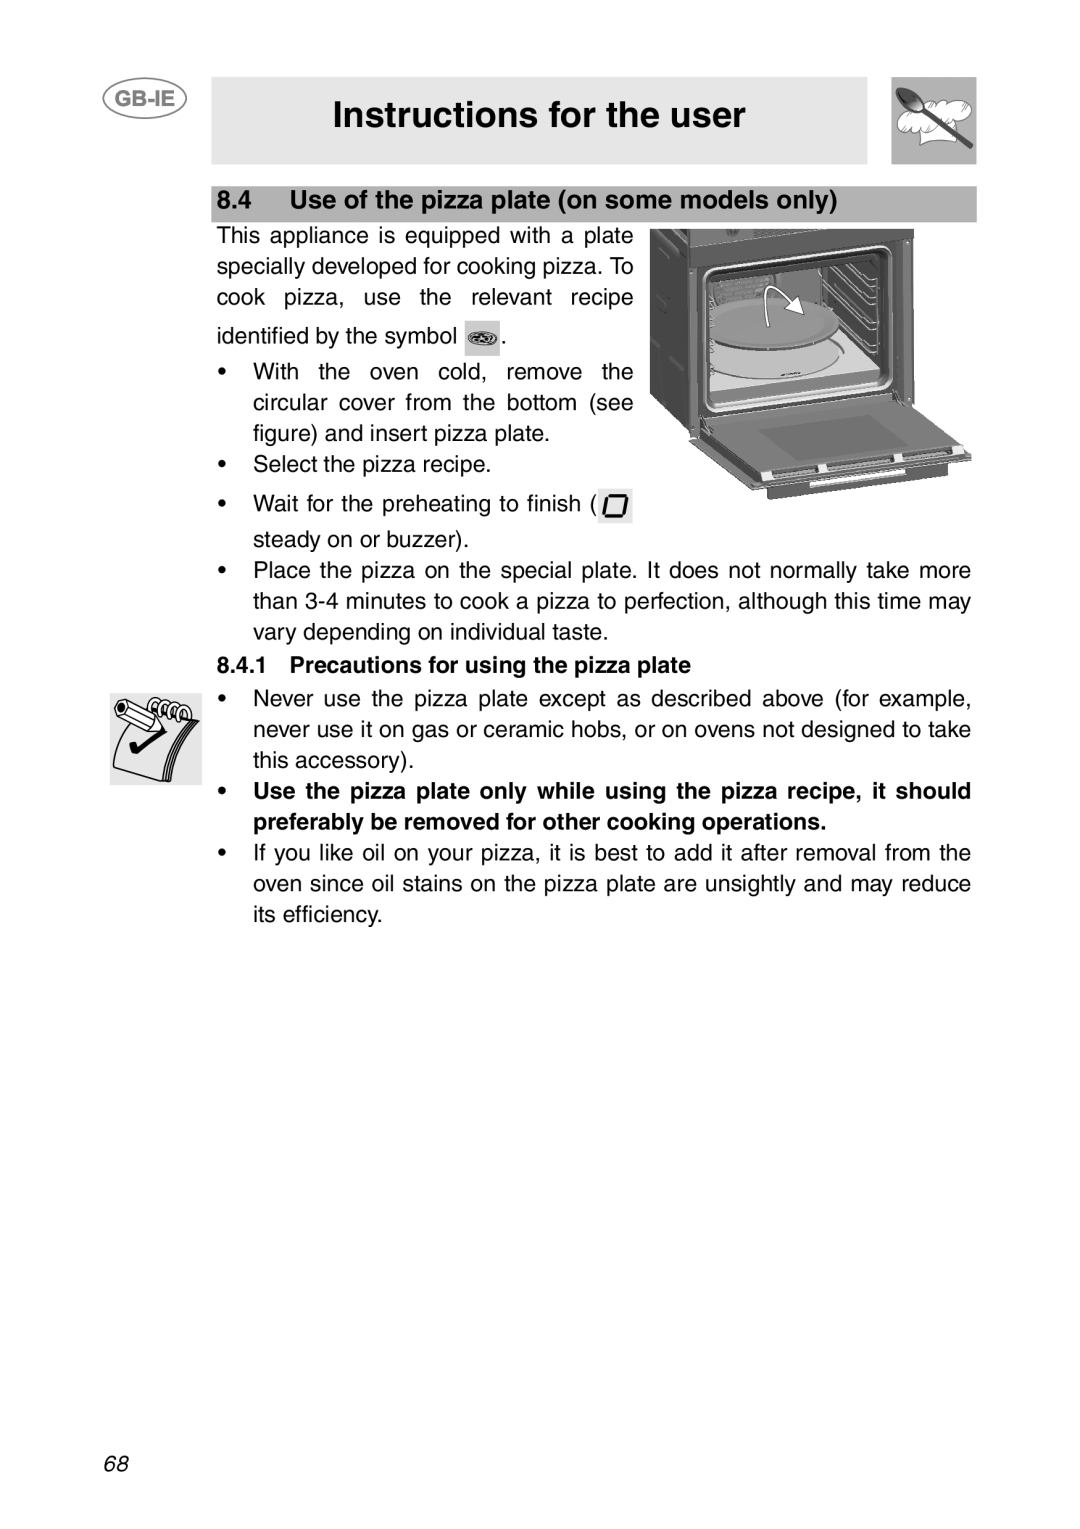 Smeg SC112-2 Use of the pizza plate on some models only, Precautions for using the pizza plate, Instructions for the user 